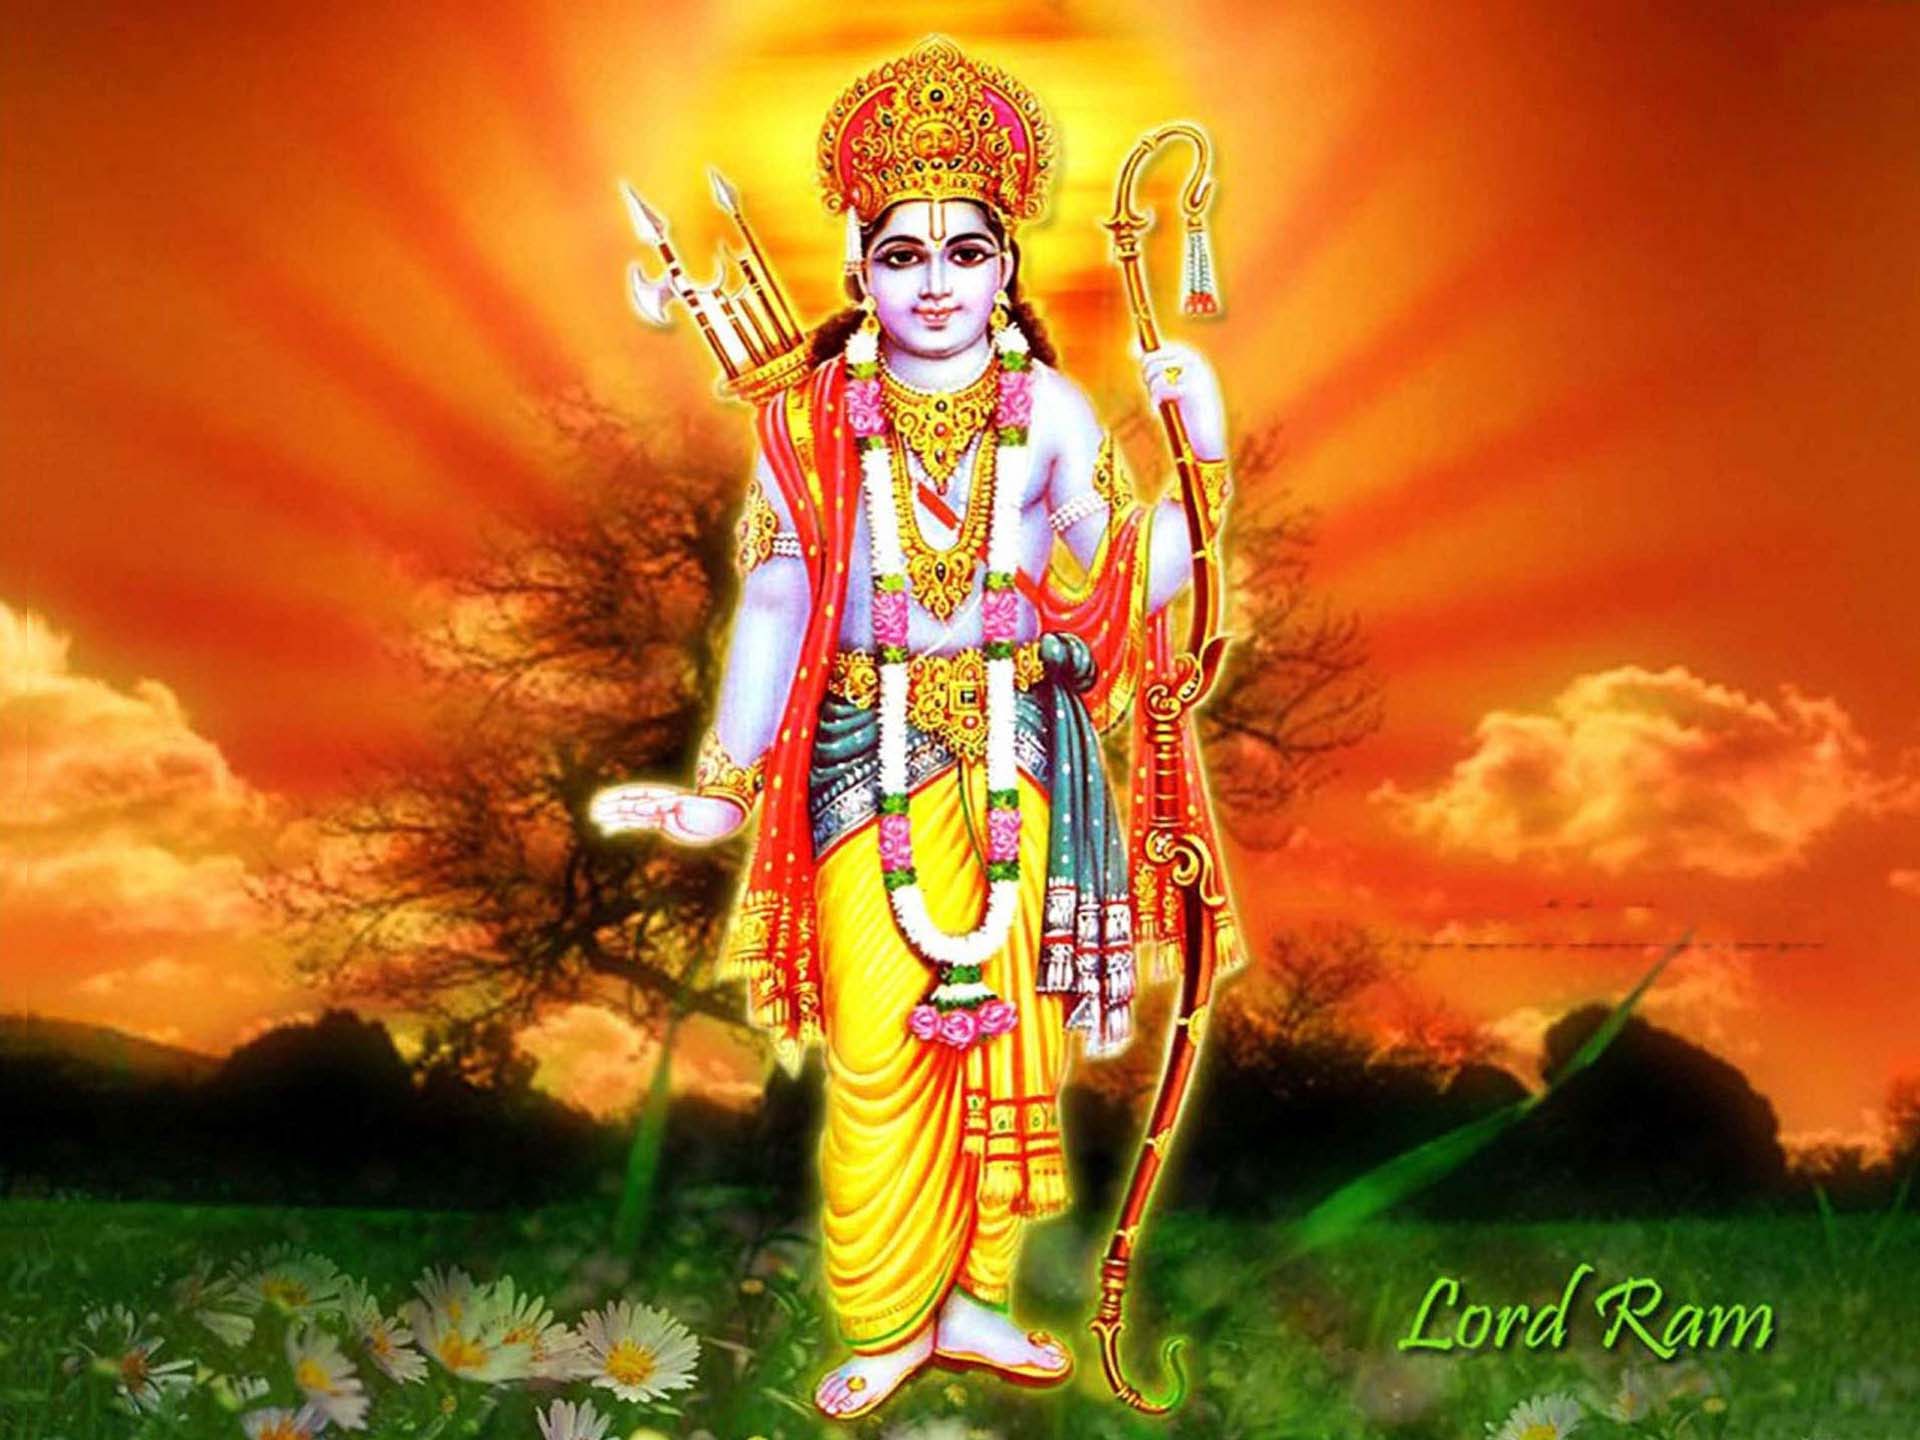 Jai Shri Ram Wallpapers for Free Download – Daily Backgrounds in HD